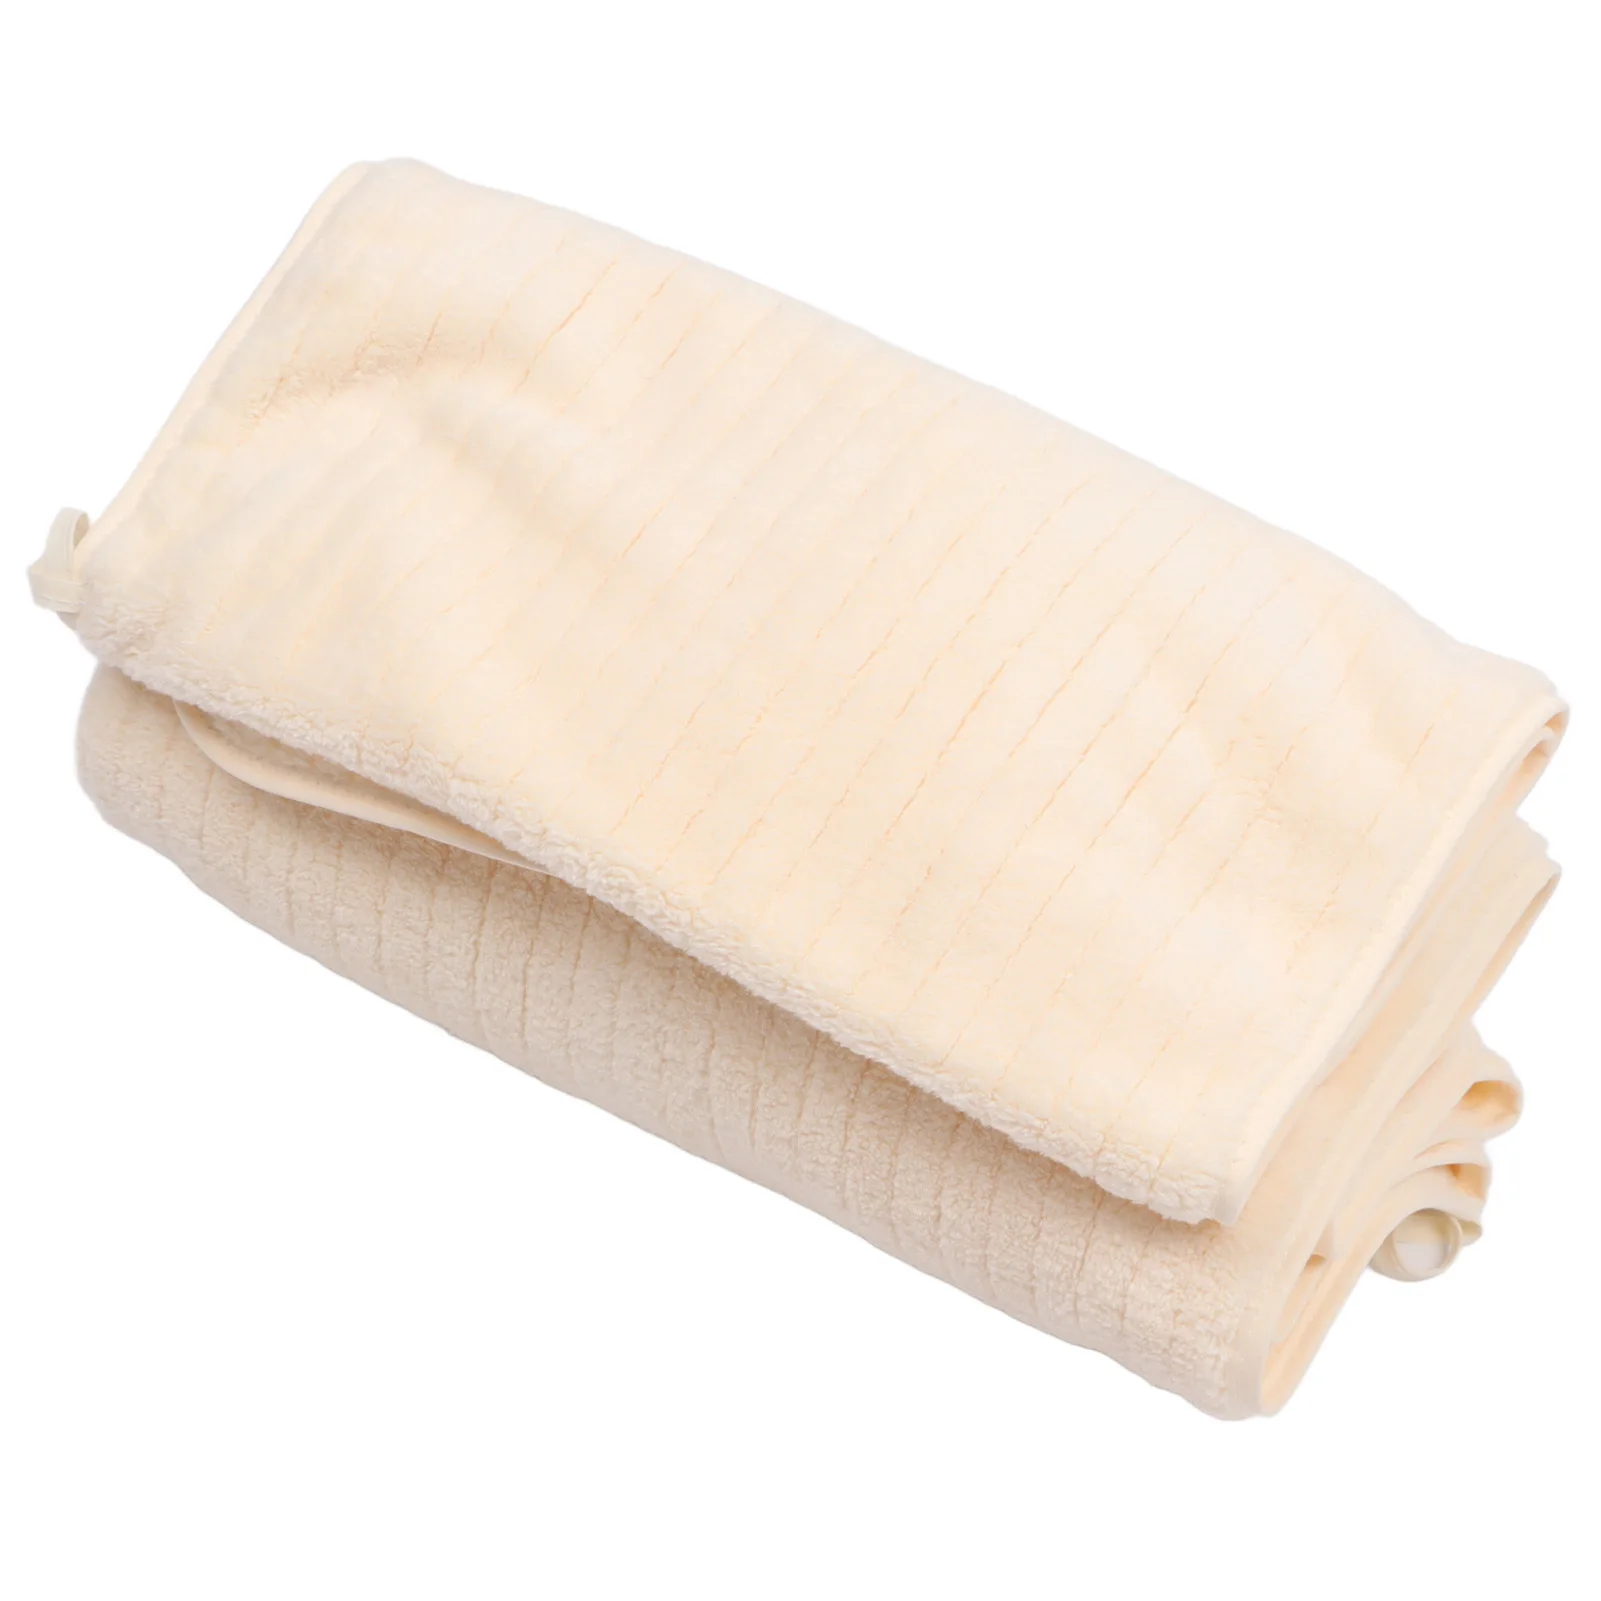 

2Pcs Towel Set Soft Coral Velvet Highly Absorbent Quick Drying Lightweight Hand Towels And Bath Towels For Bathroom